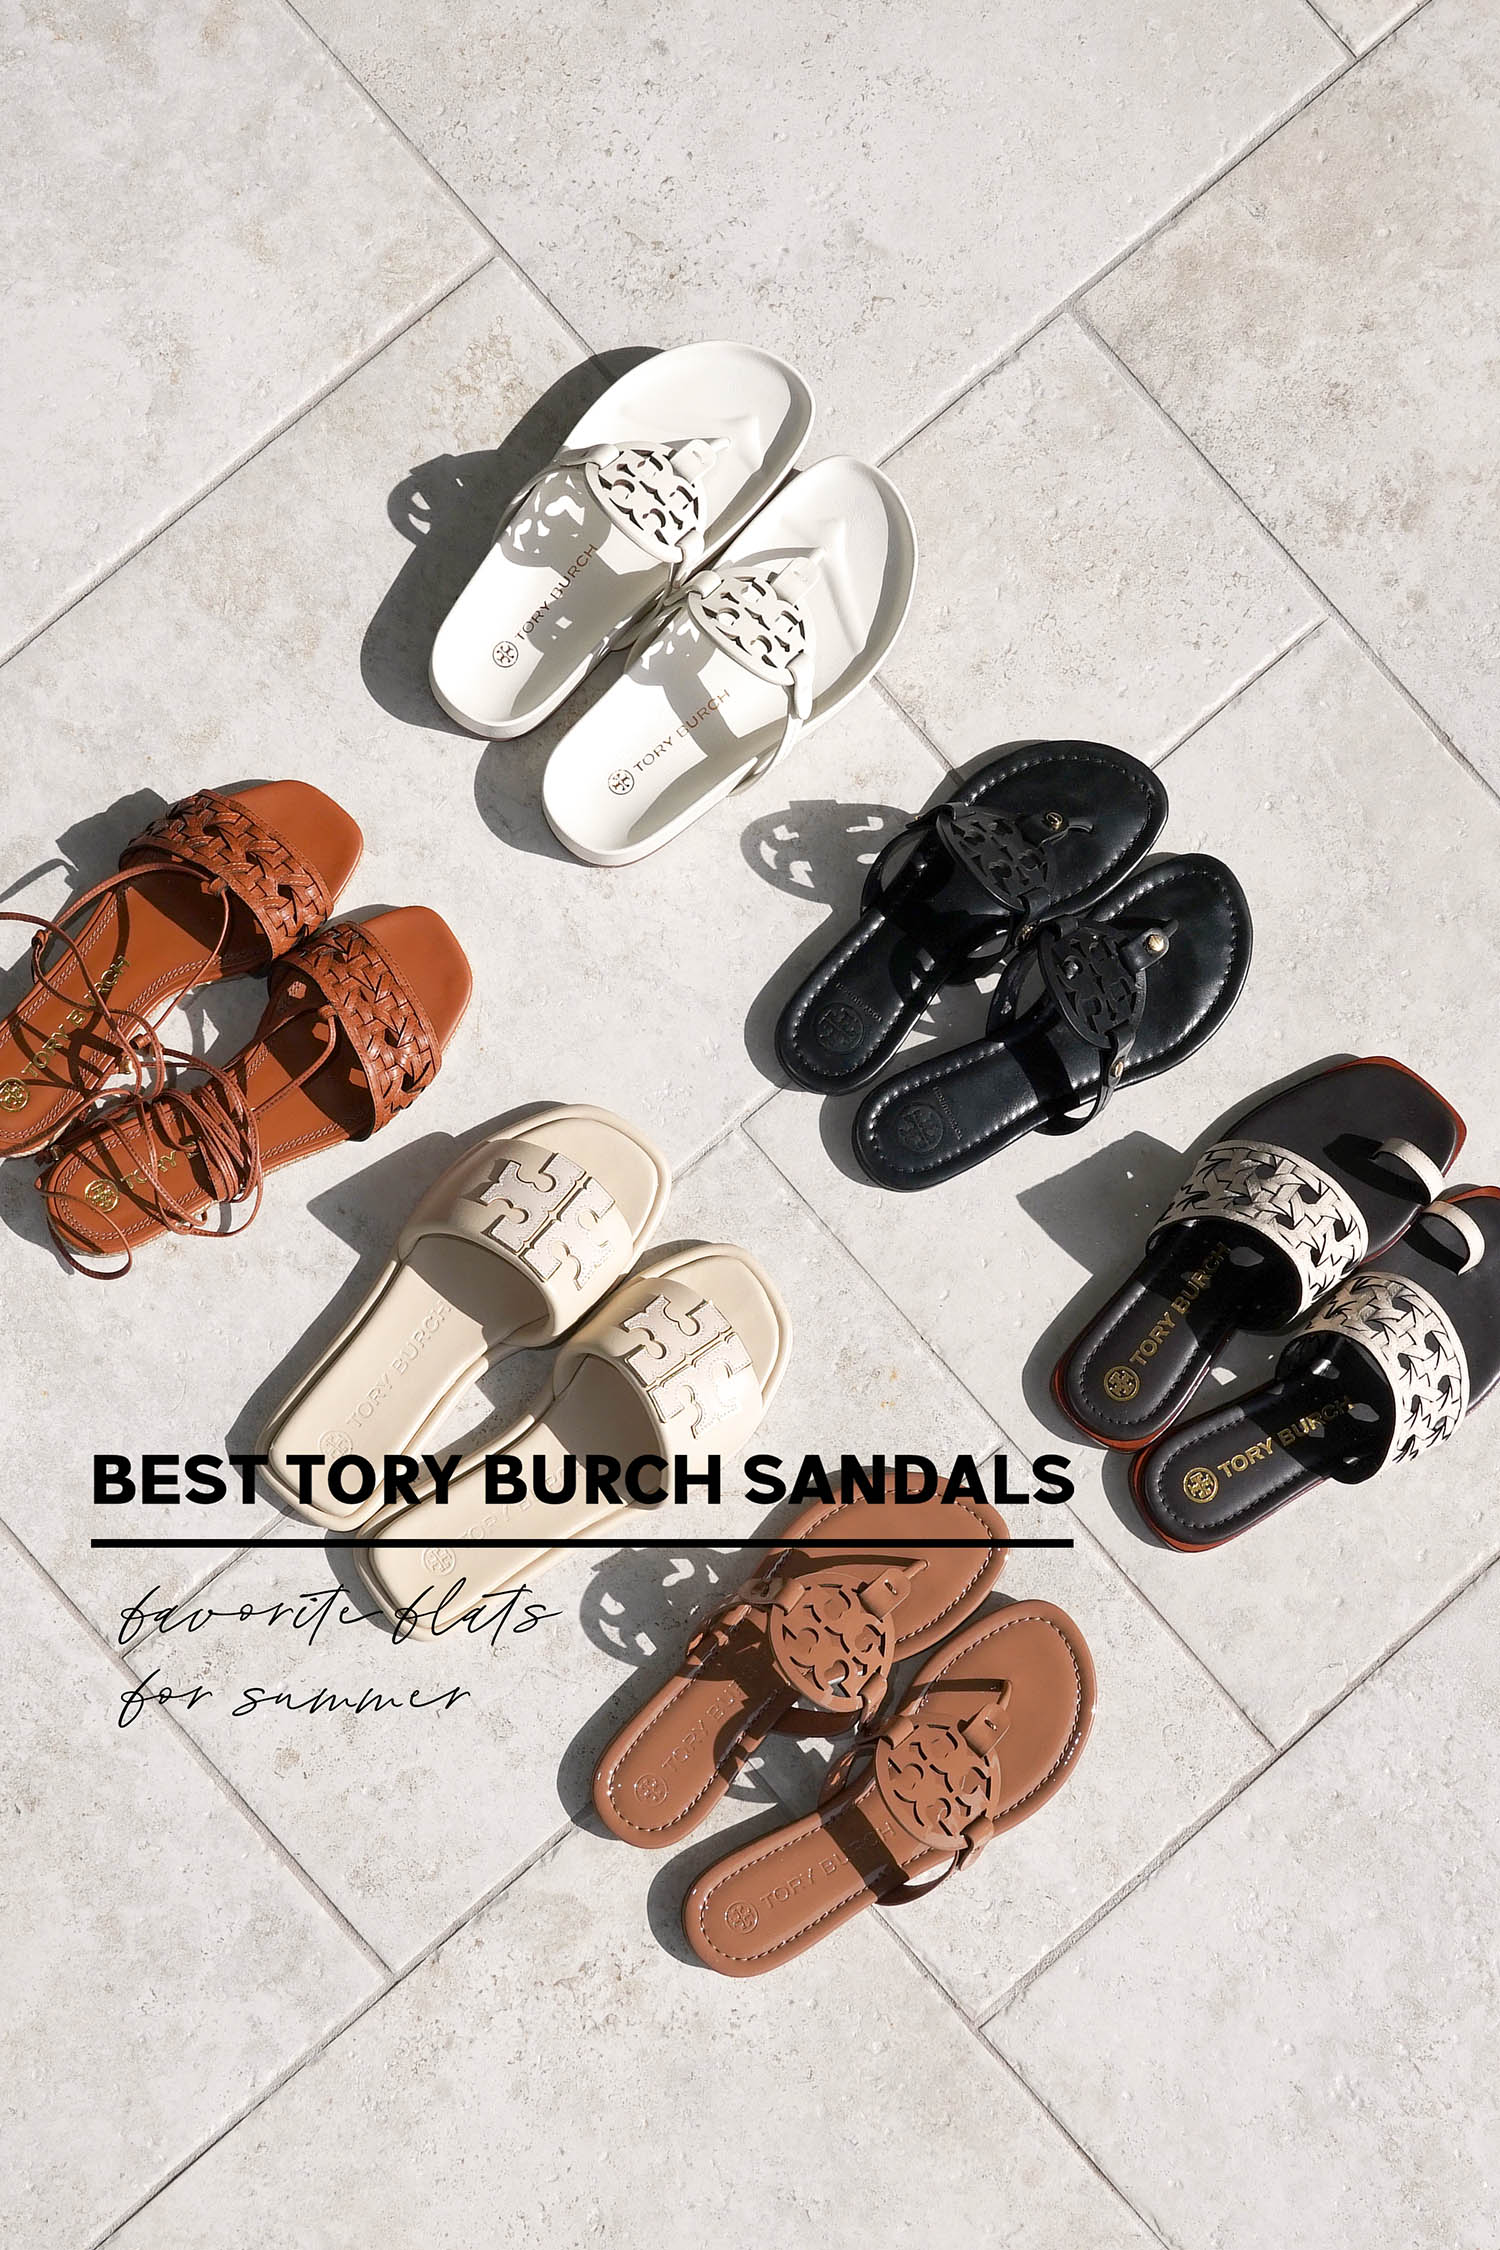 Favorite Summer Sandals from Tory Burch - The Beauty Look Book